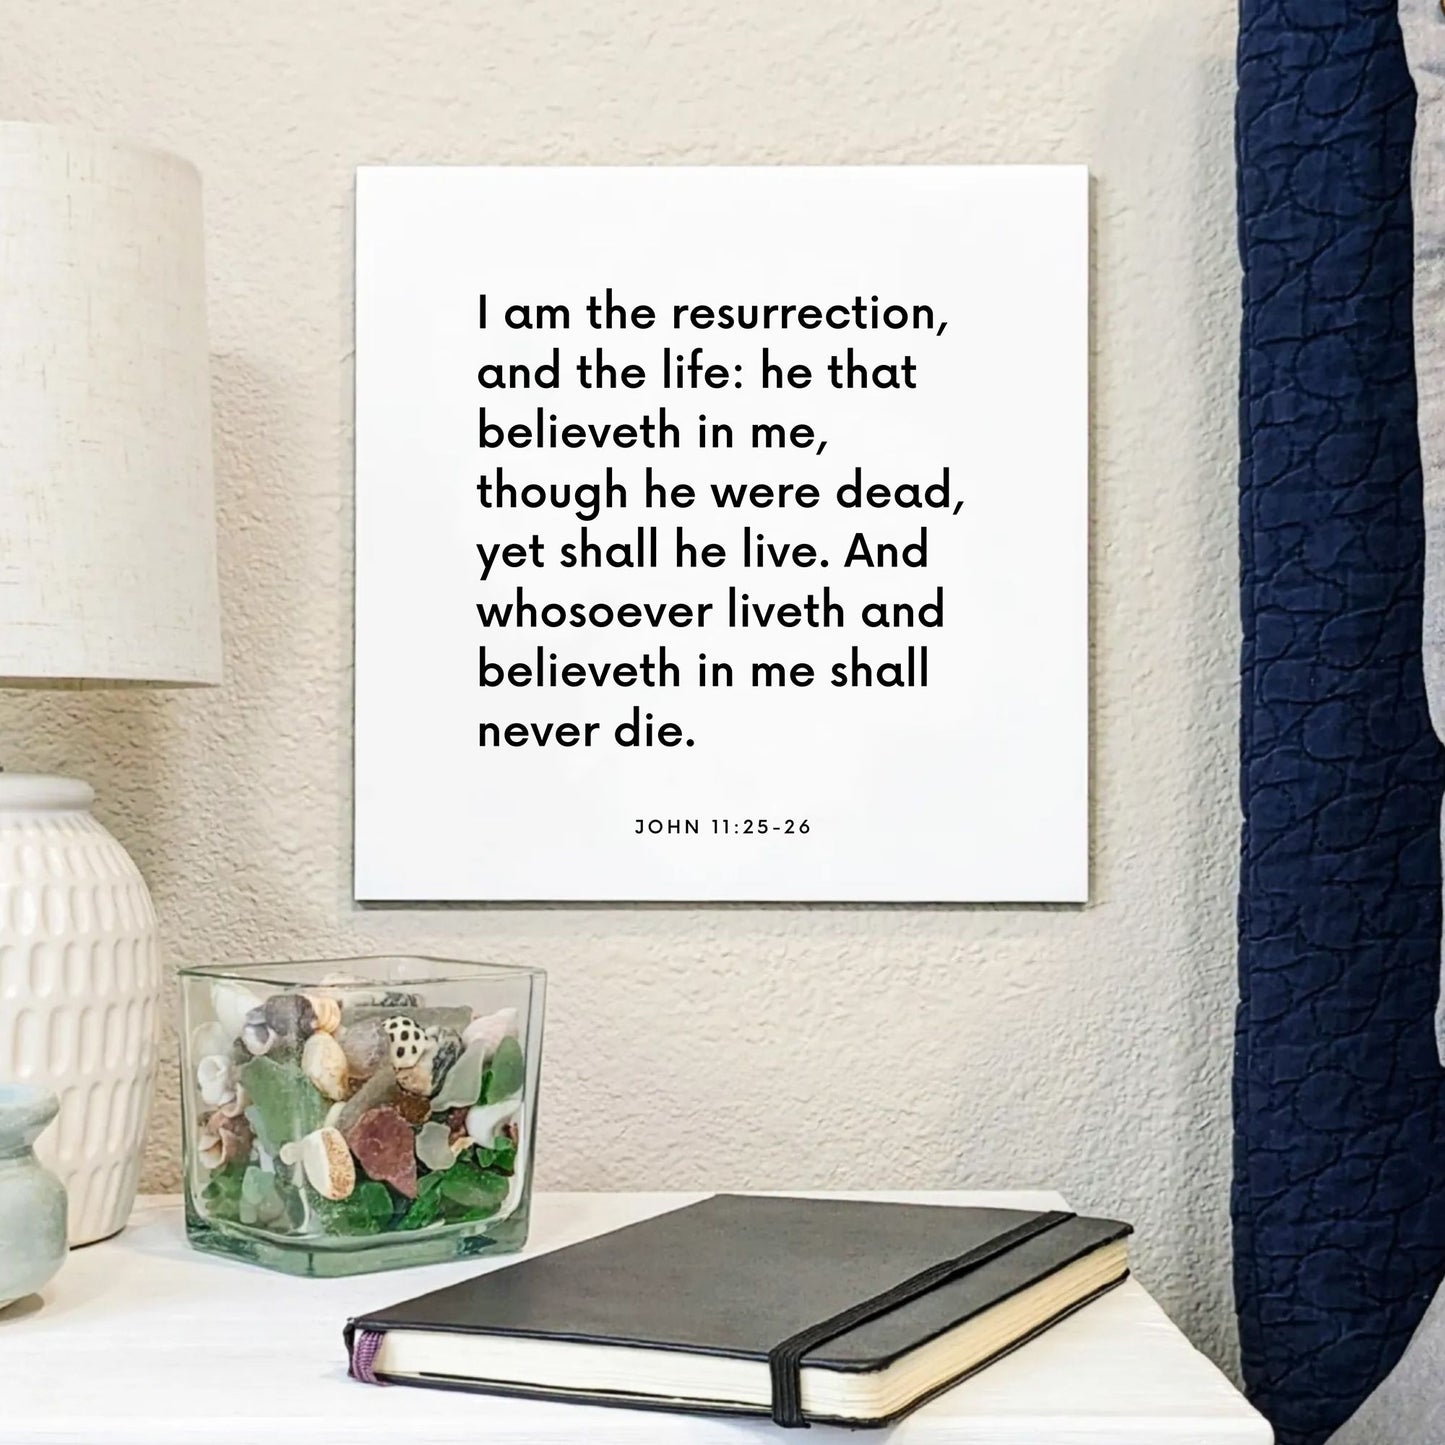 Bedside mouting of the scripture tile for John 11:25-26 - "I am the resurrection, and the life"